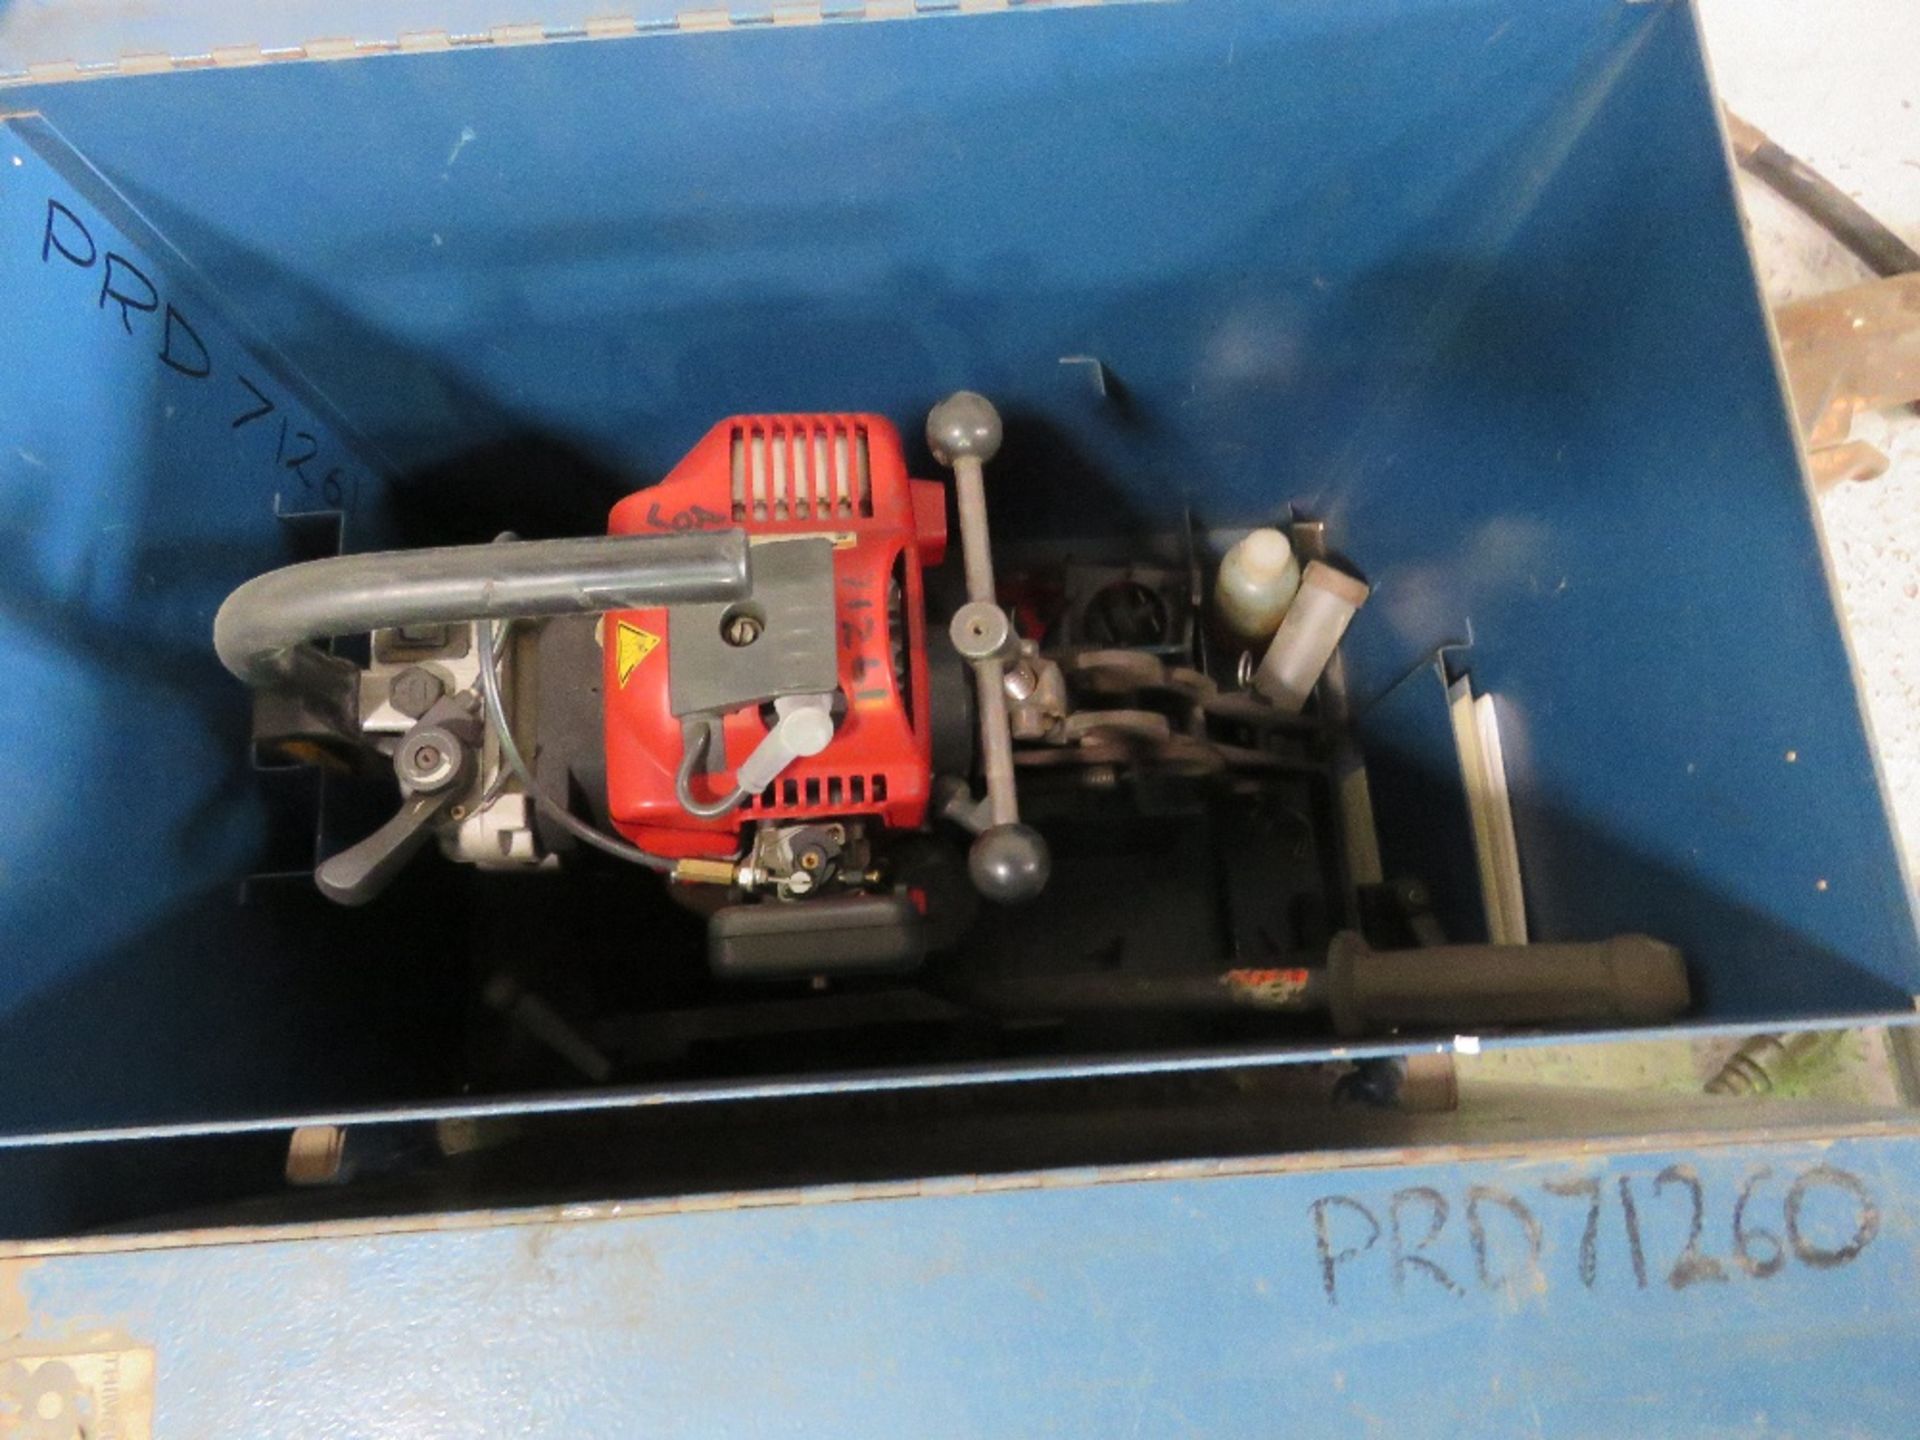 CEMBRE PETROL ENGINED RAIL DRILL IN A BOX. DIRECT FROM A LOCAL GROUNDWORKS COMPANY AS PART OF THE - Image 4 of 5